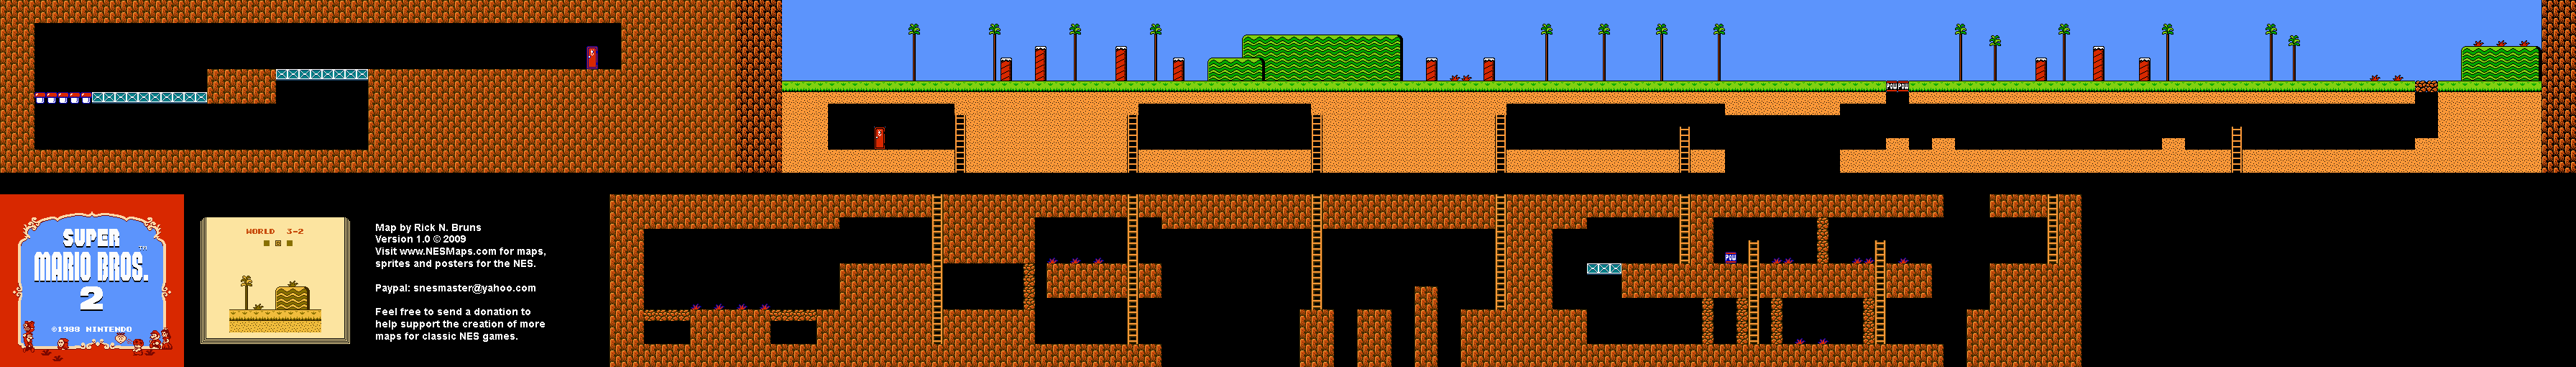 Super Mario Brothers 2 - World 3-2 Nintendo NES Background Only Map